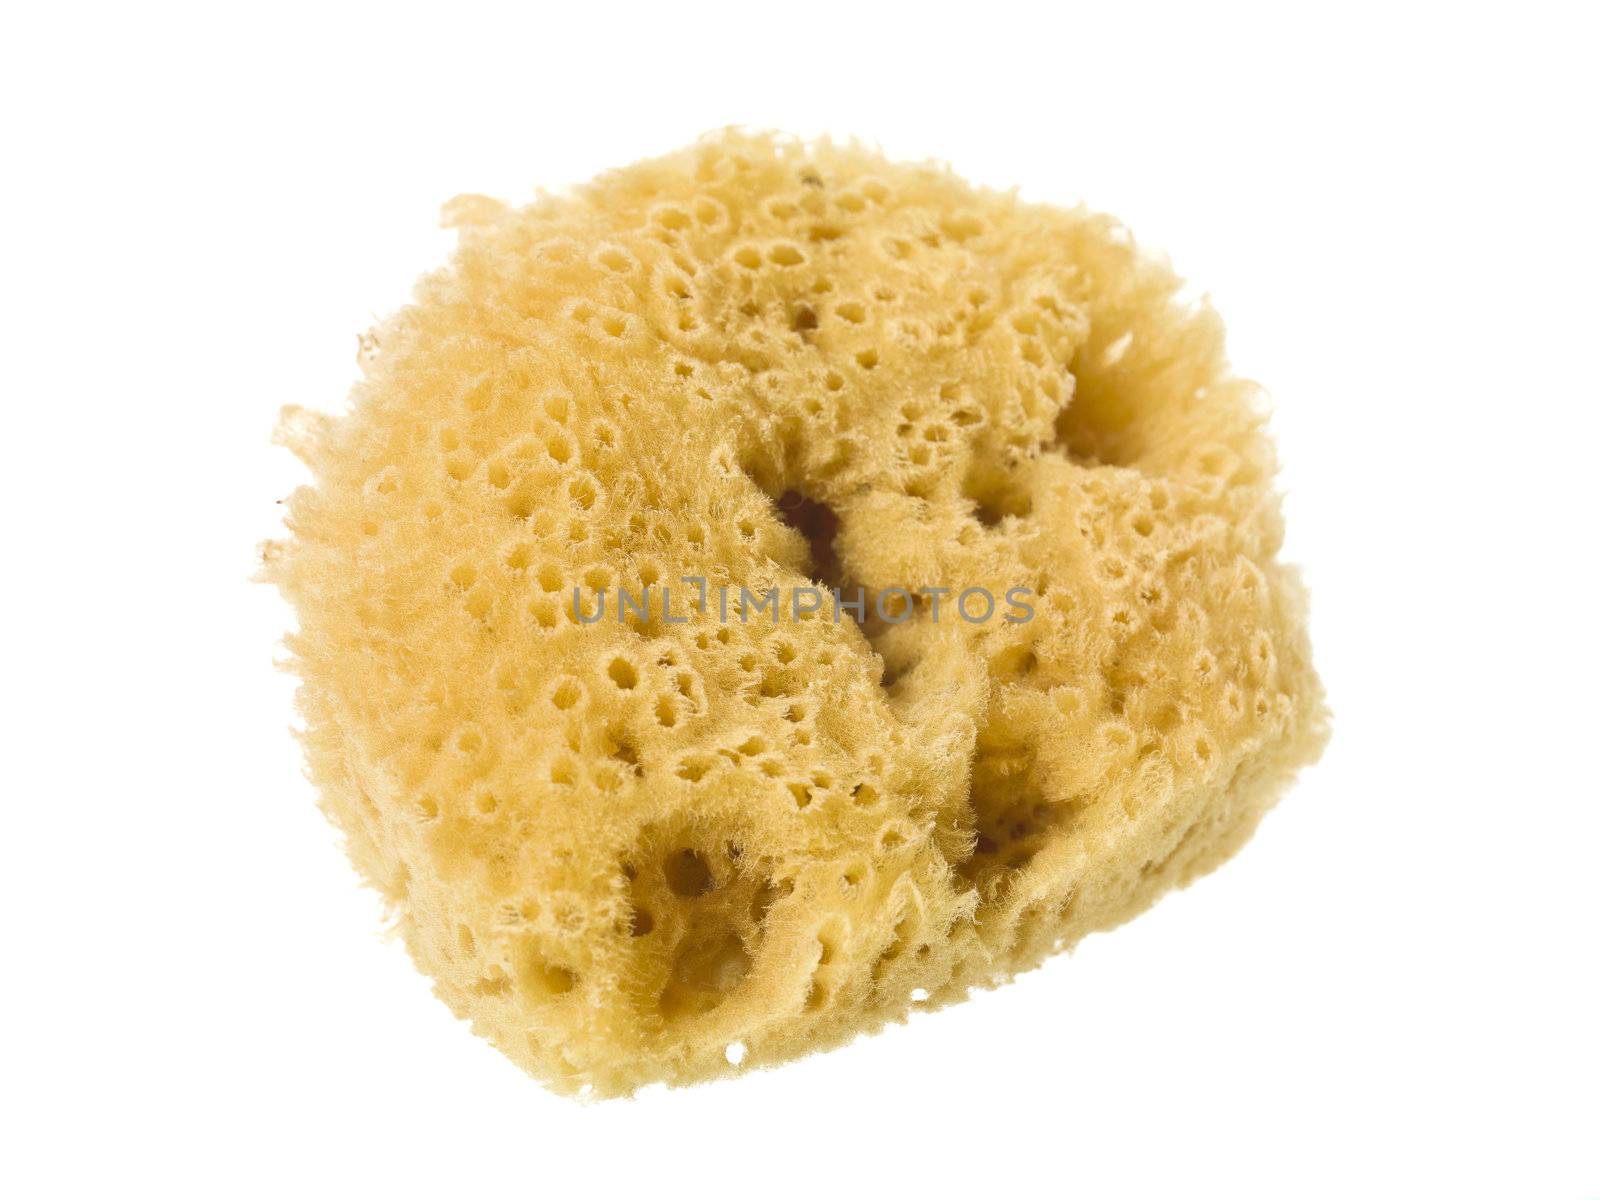 Close up image of sponge scrubber against white background